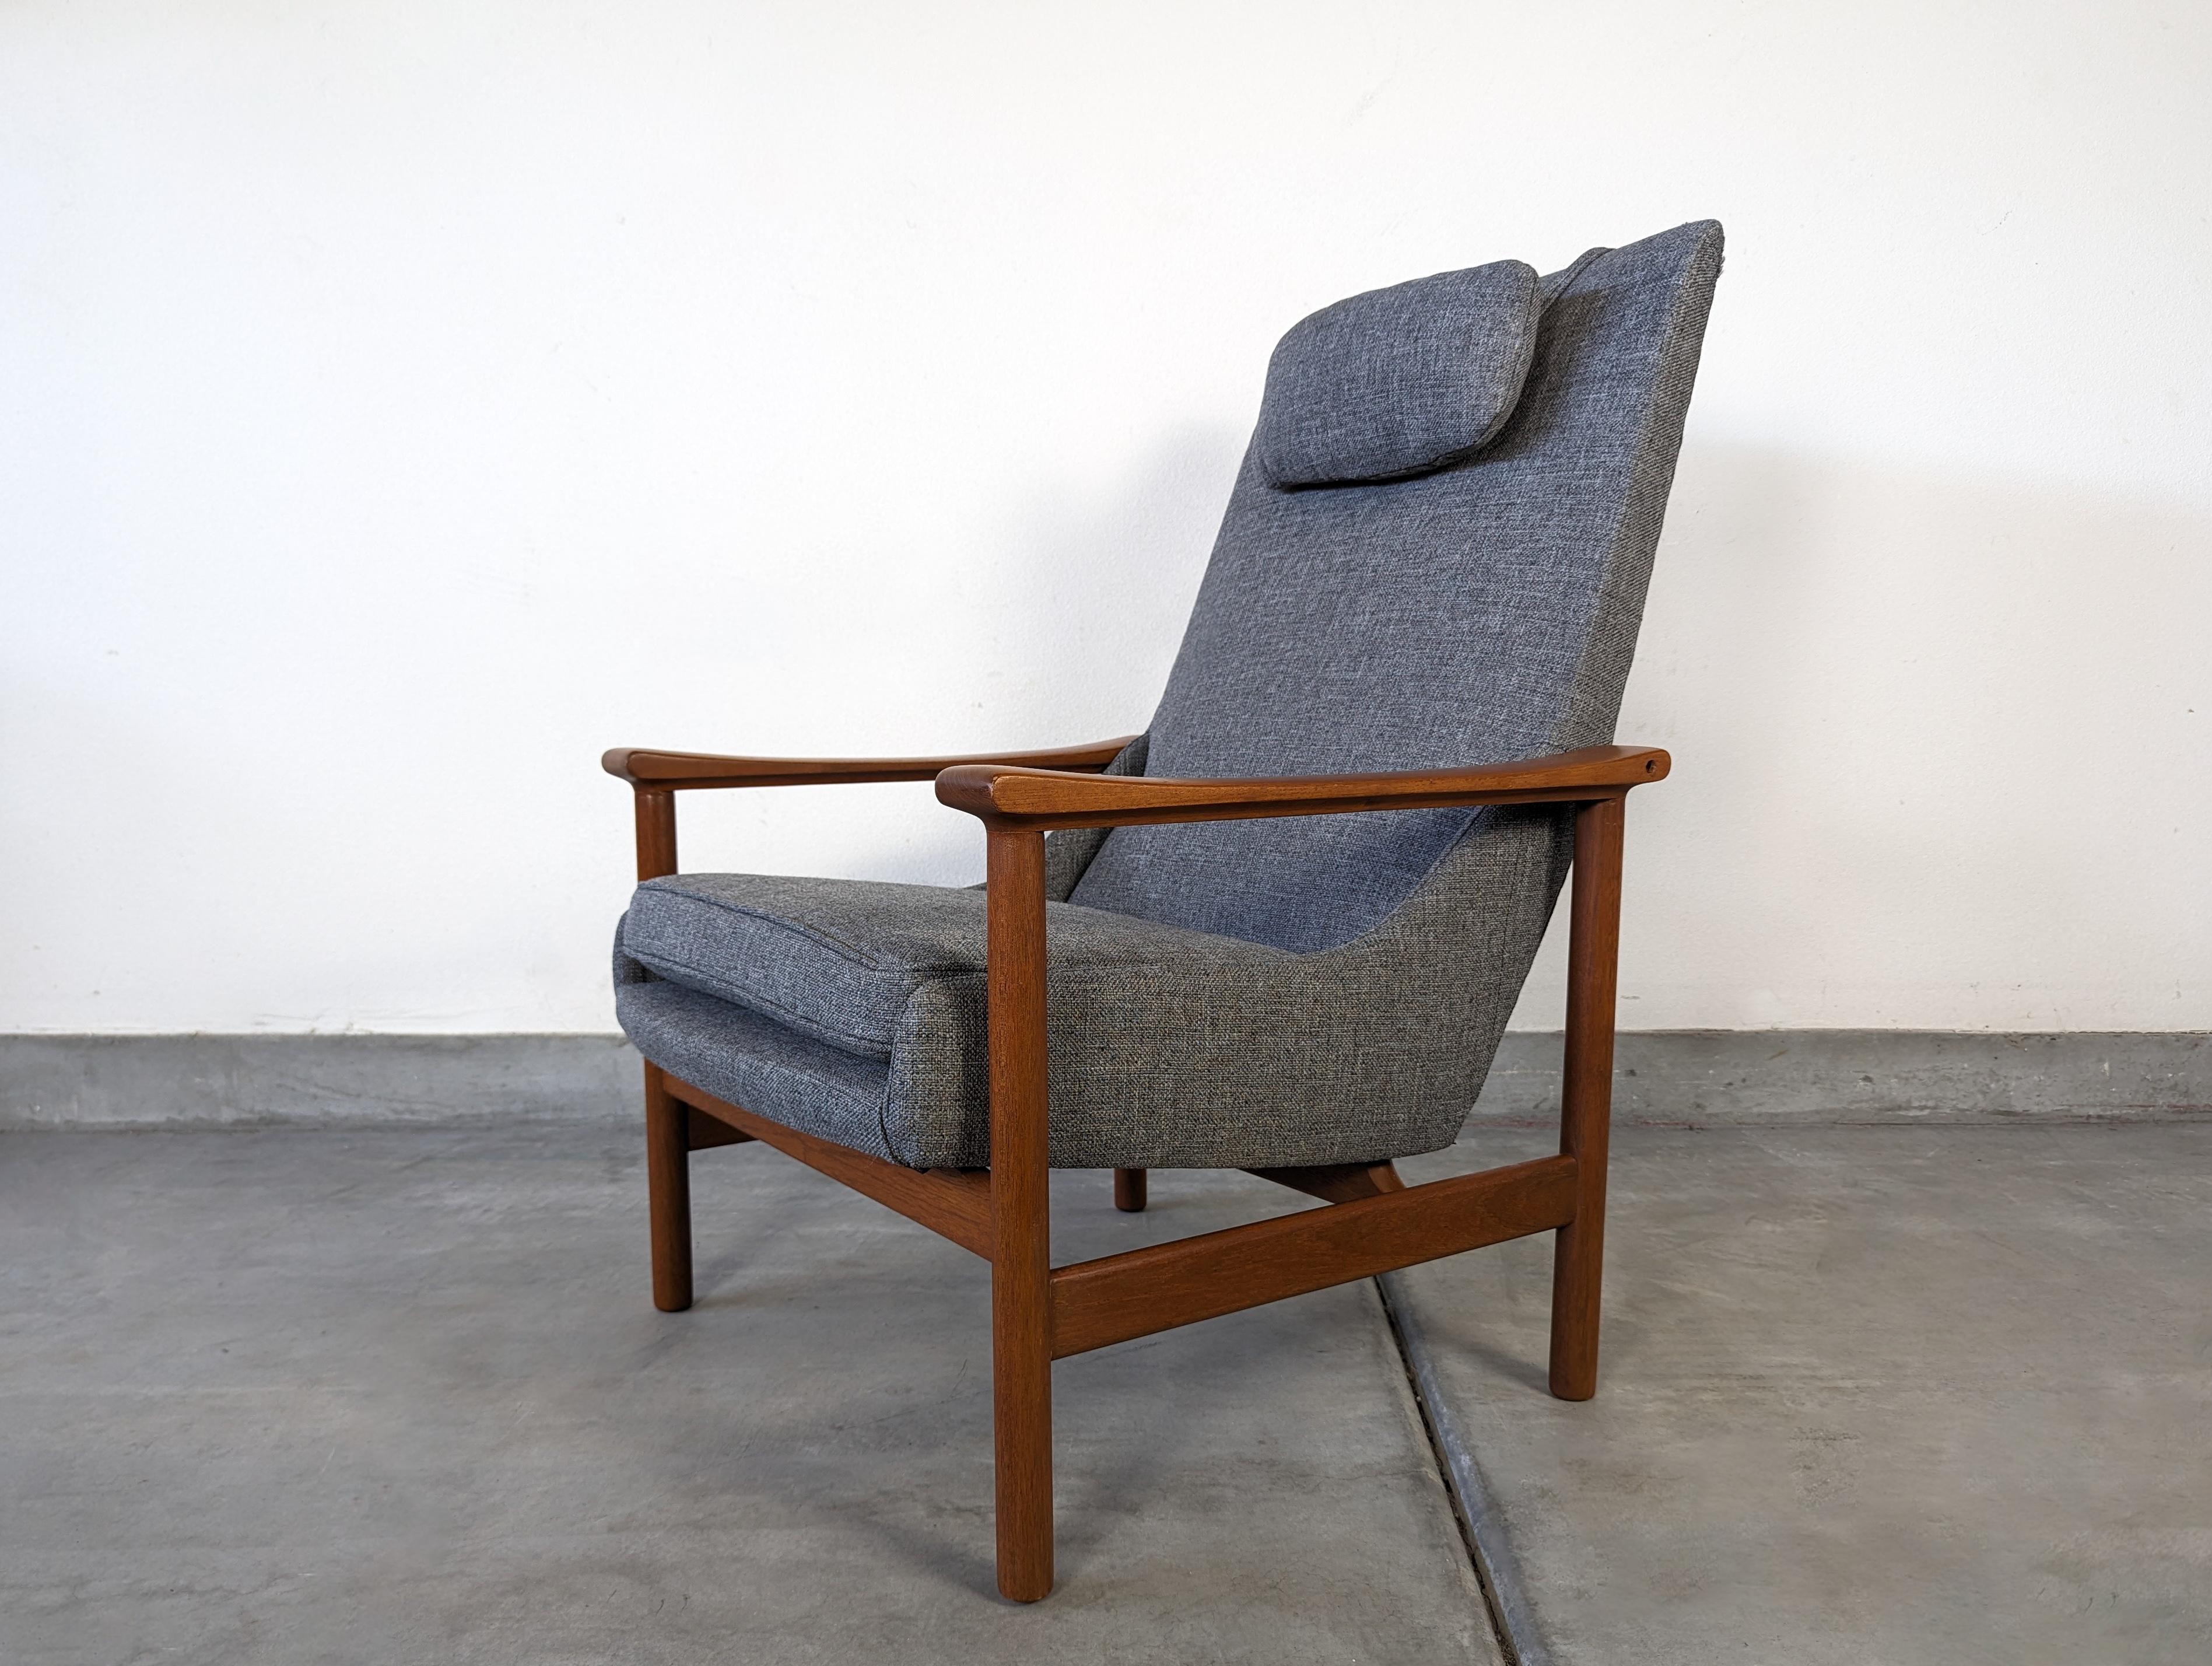 Introducing a timeless piece of Scandinavian design, this Model-251 lounge chair effortlessly combines elegance, comfort, and craftsmanship. With its stunning teak base and newly upholstered gray fabric, this chair is a true statement of style and